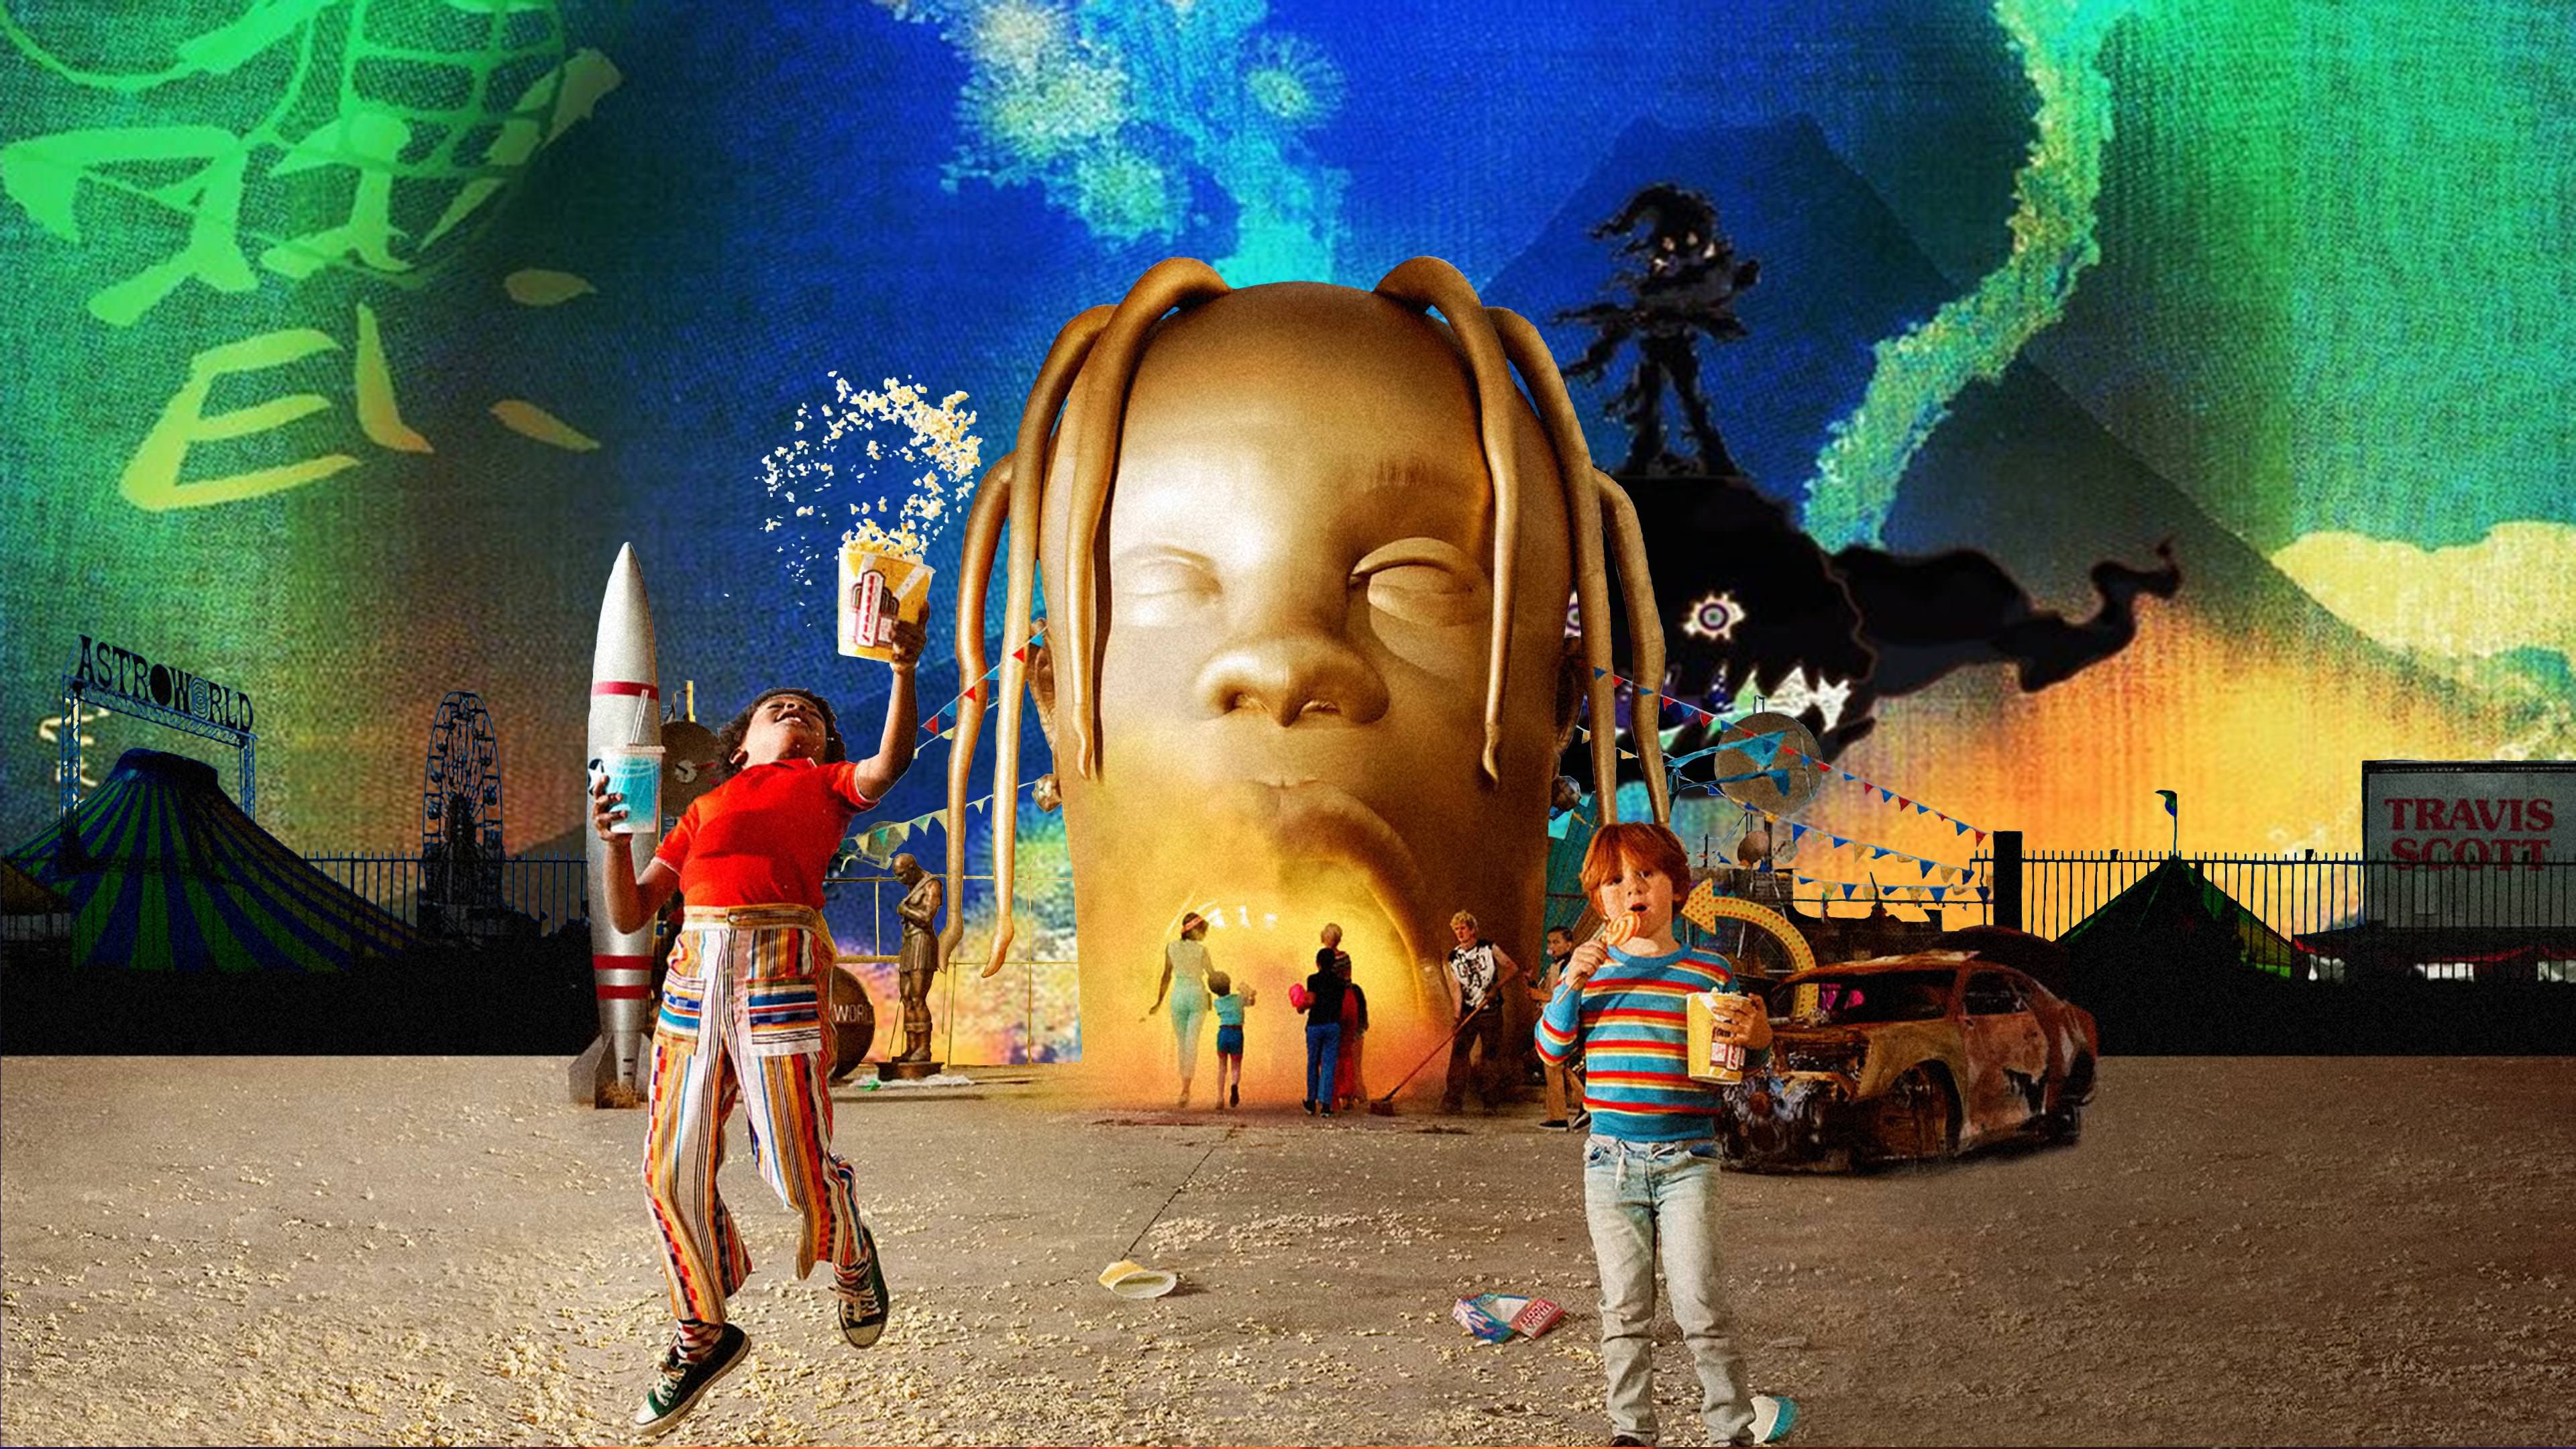 Astroworld 4K Wallpapers - Top Free Astroworld 4K Backgrounds